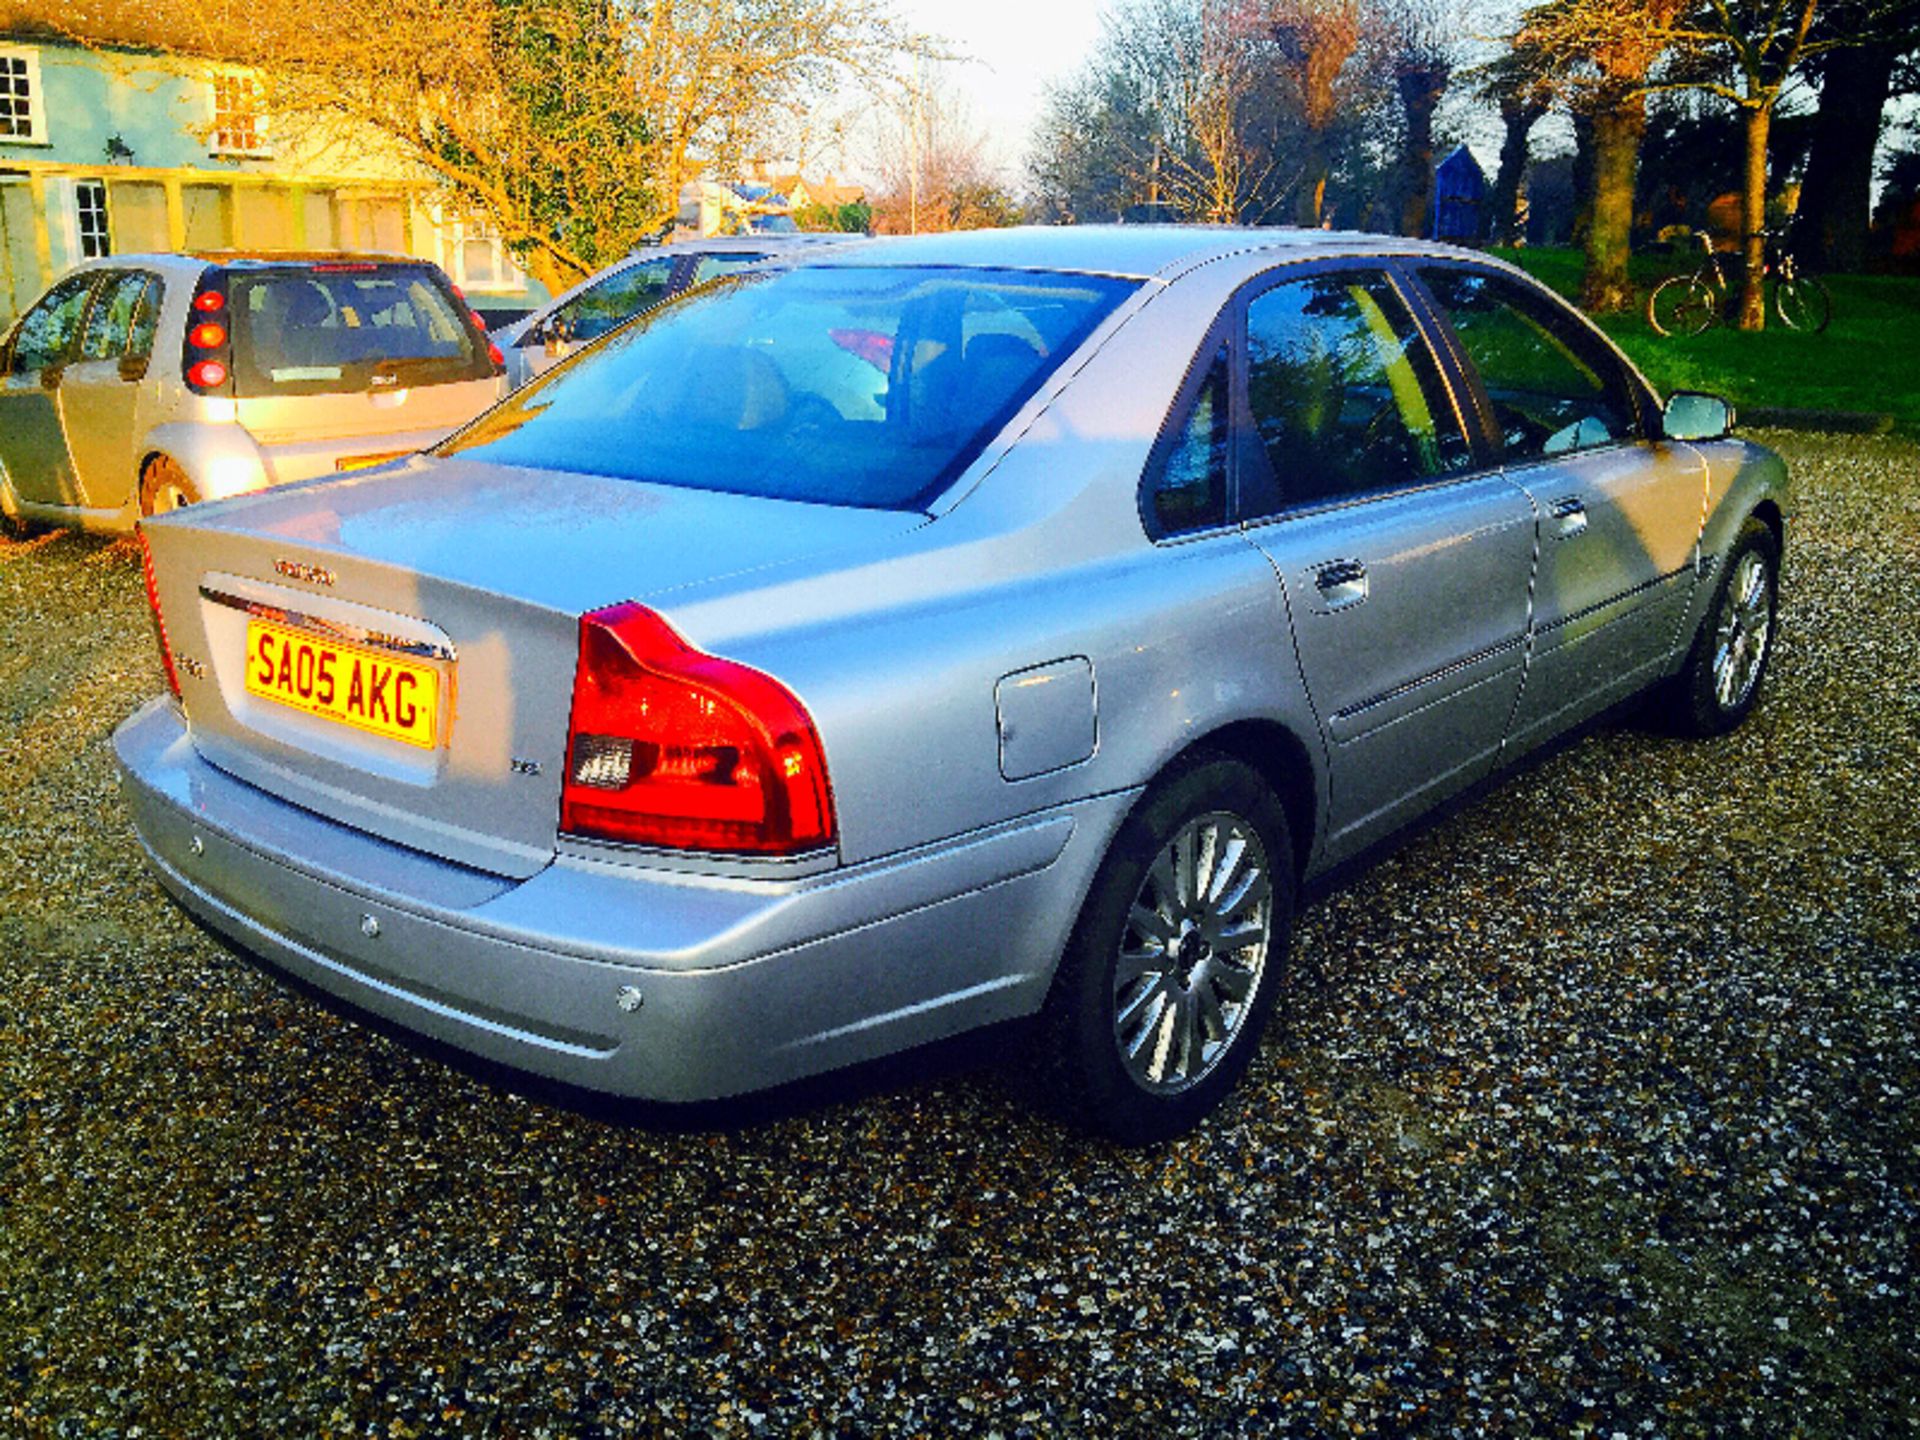 (On Sale) VOLVO S80 SE 2.4 D5 AUTO 2005(05) REG**METALLIC SILVER**A/C*CLIMATE CONTROL*FULL LEATHER* - Image 5 of 17